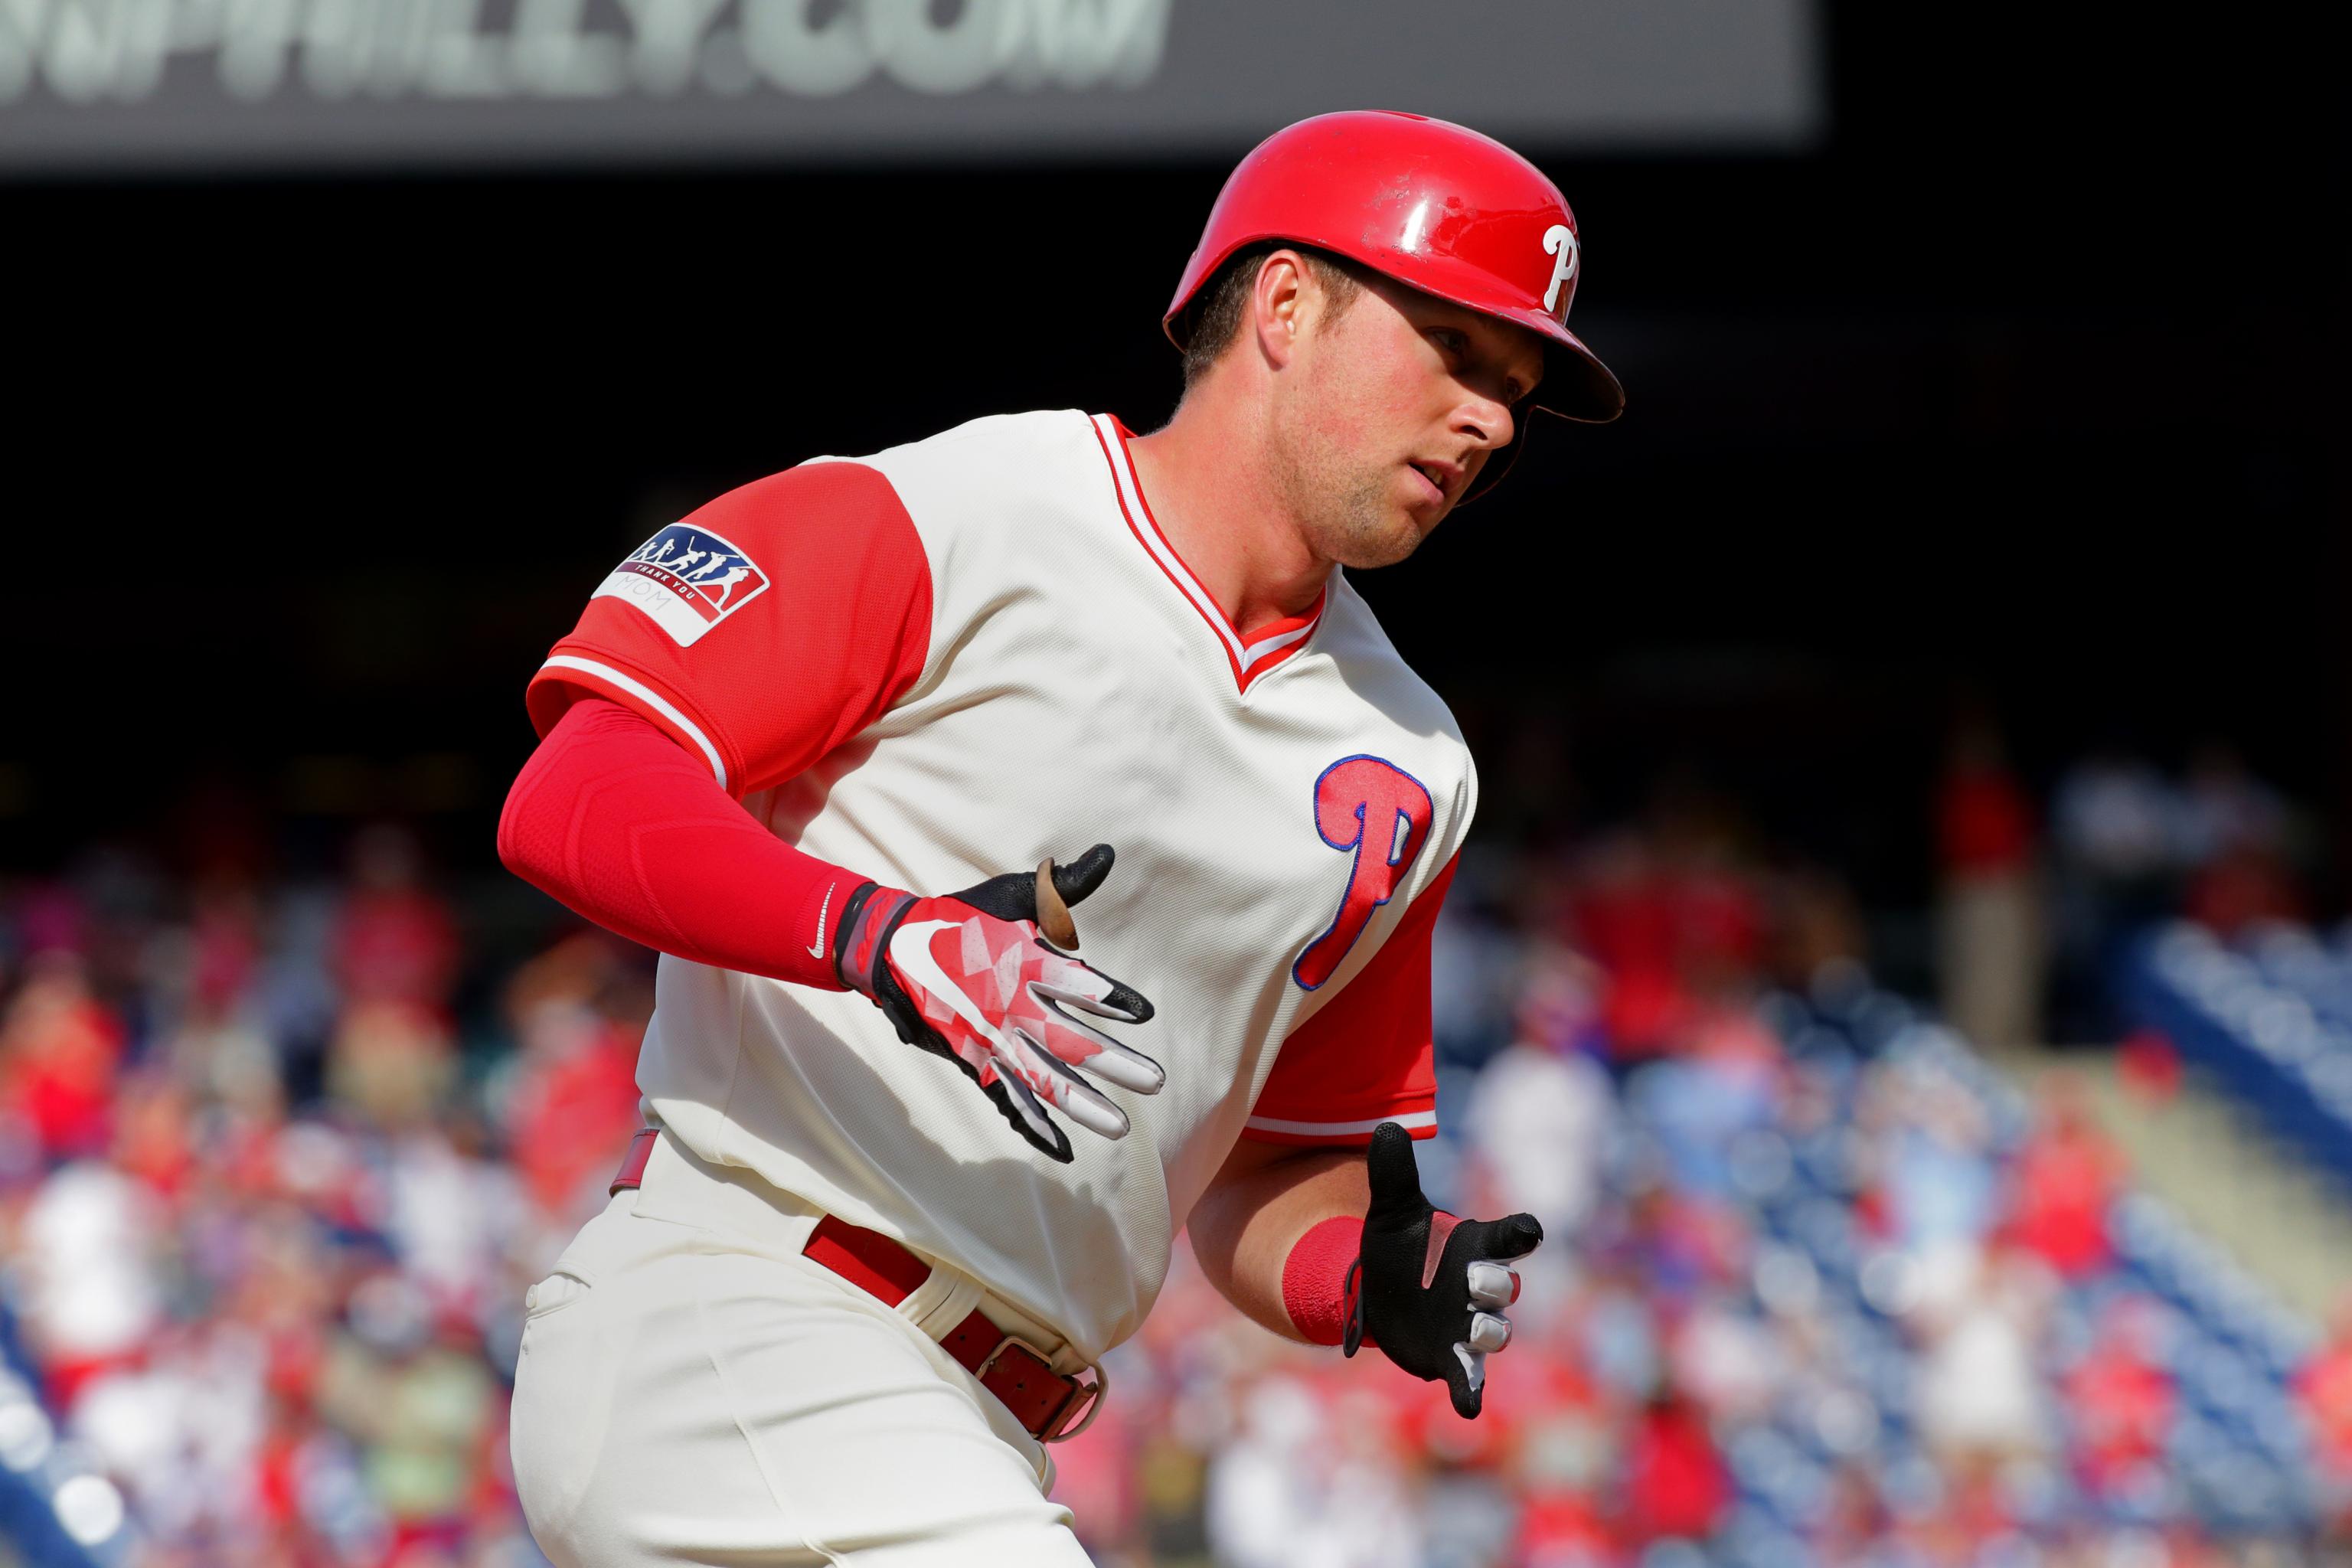 Rhys Hoskins 2nd-Quickest in MLB History to 25 Career RBI